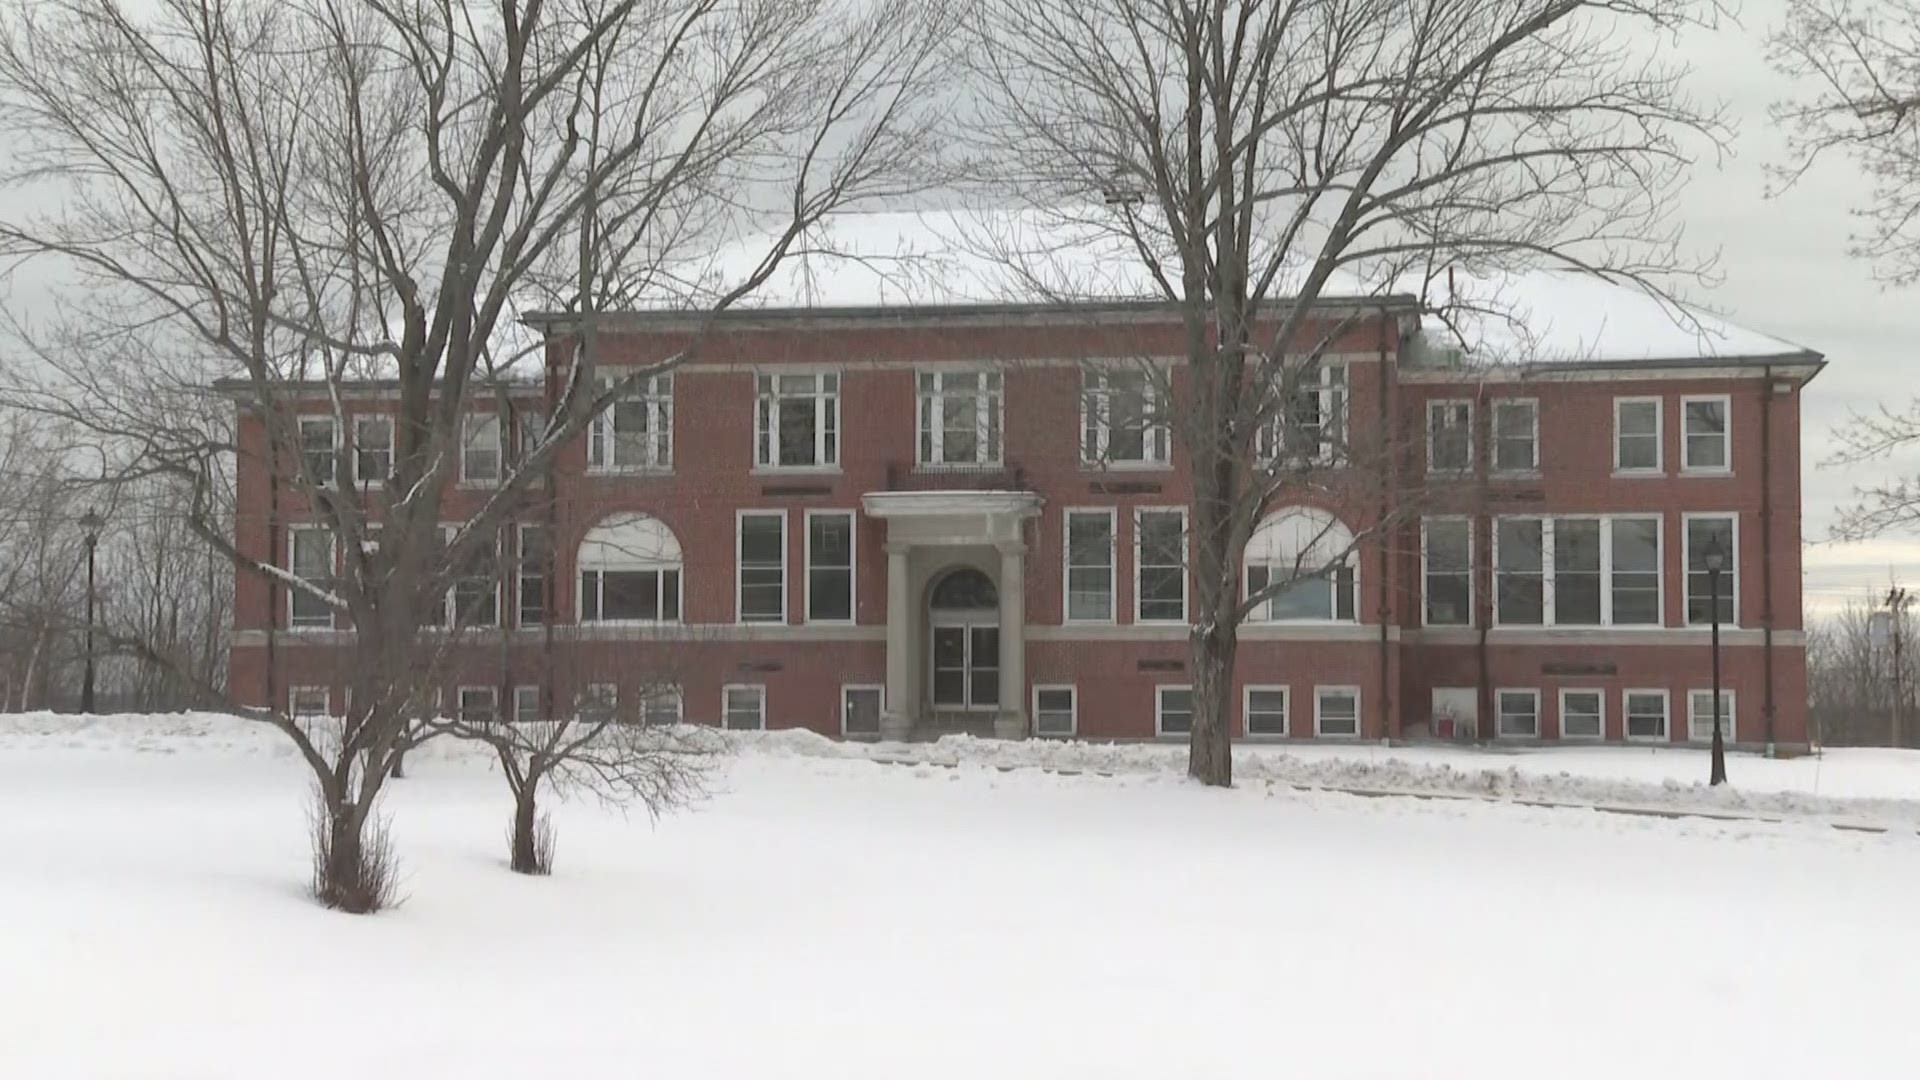 University of Maine at Augusta is using an historic building in Hallowell as new residence hall in Fall